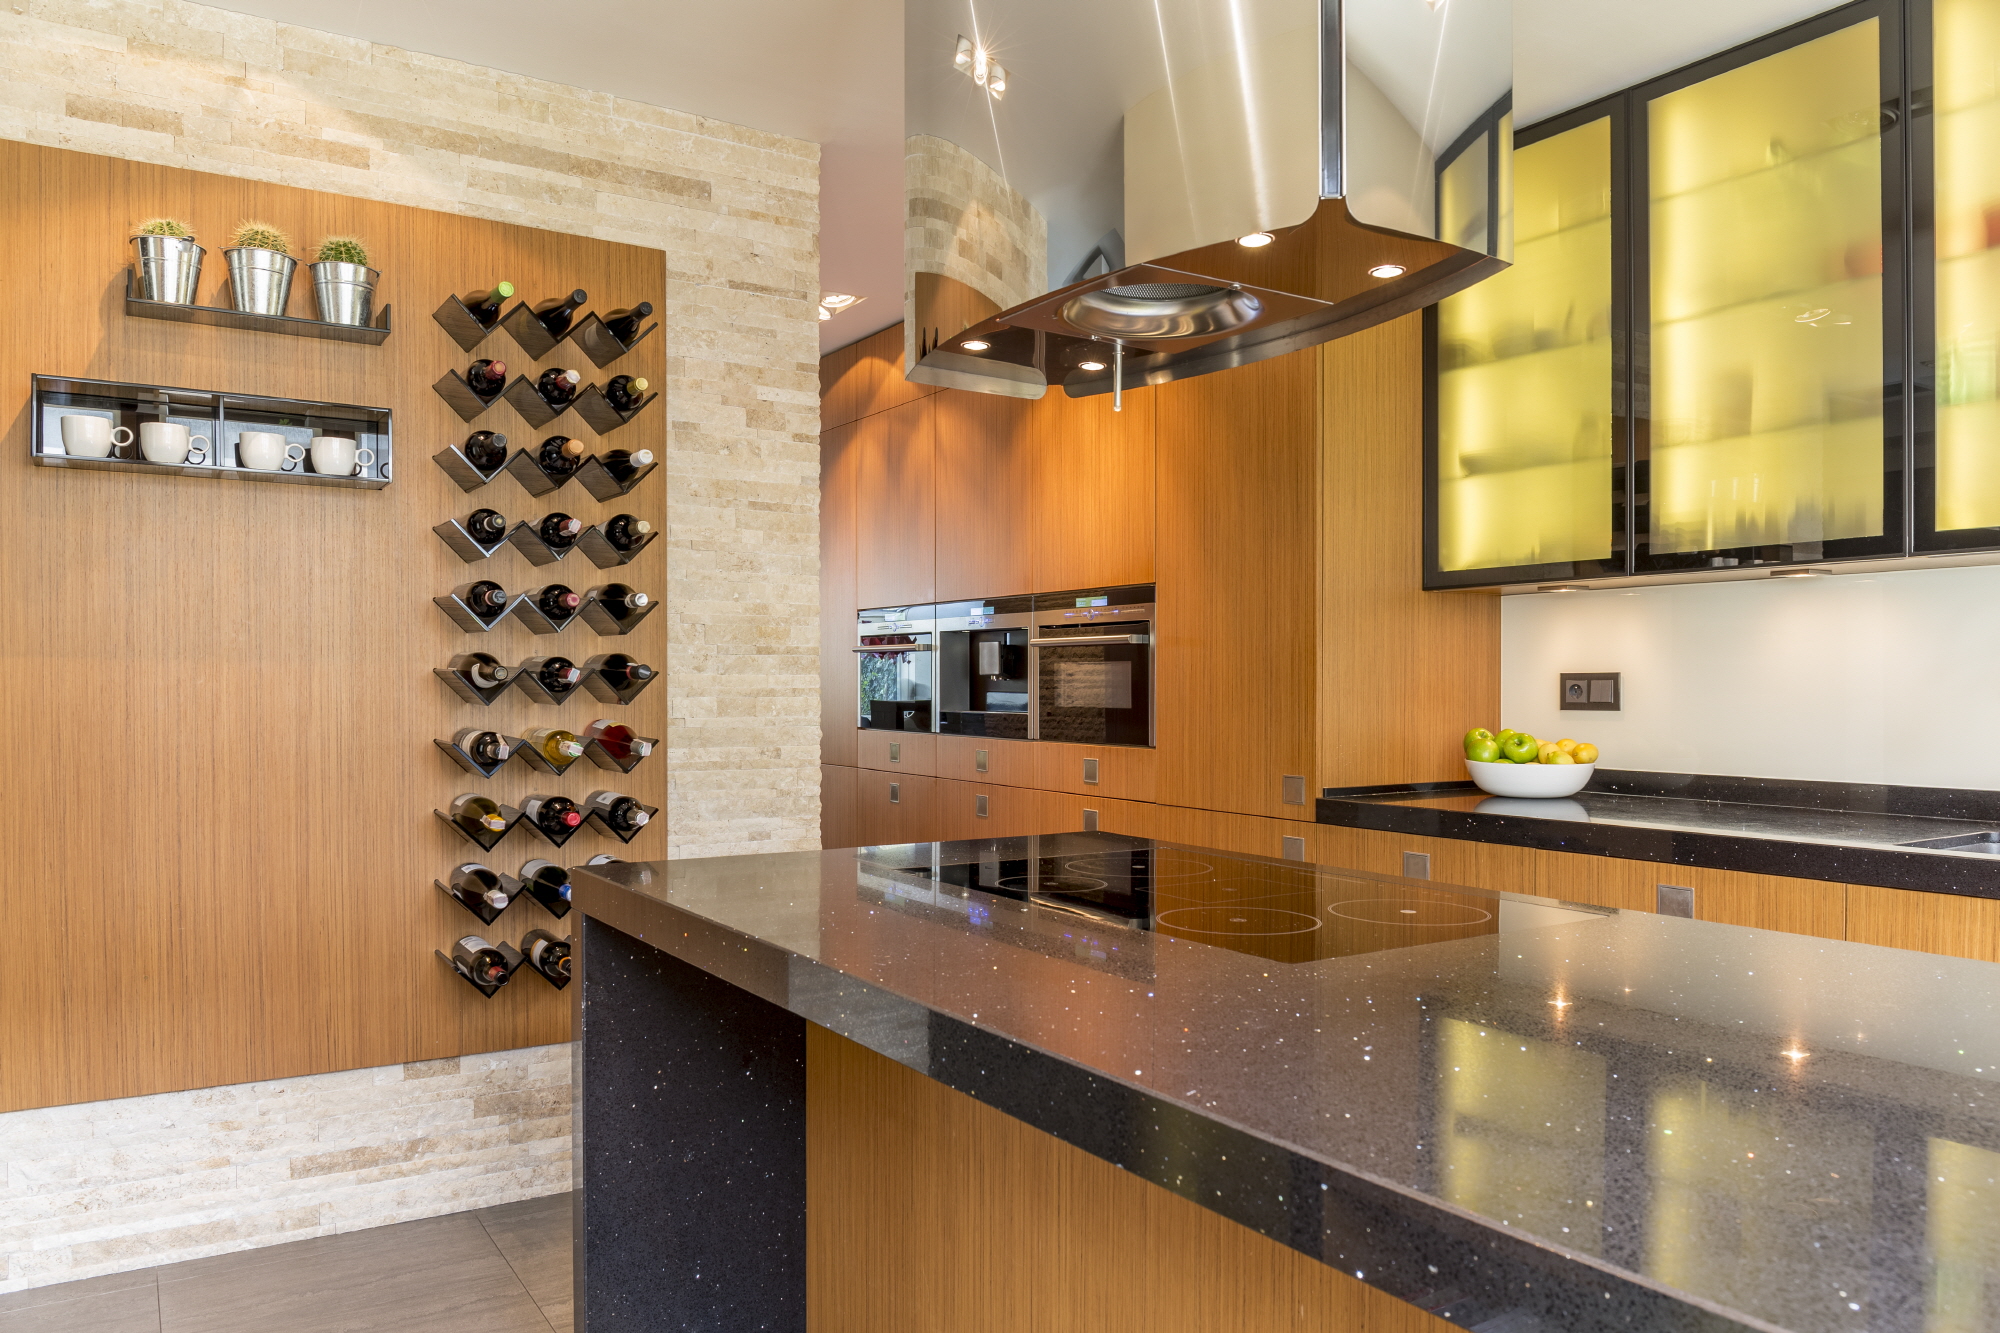 Make the most of a small kitchen with a wall-mounted wine rack or a standing rack on a free window sill for a stylish and space-efficient wine storage solution.